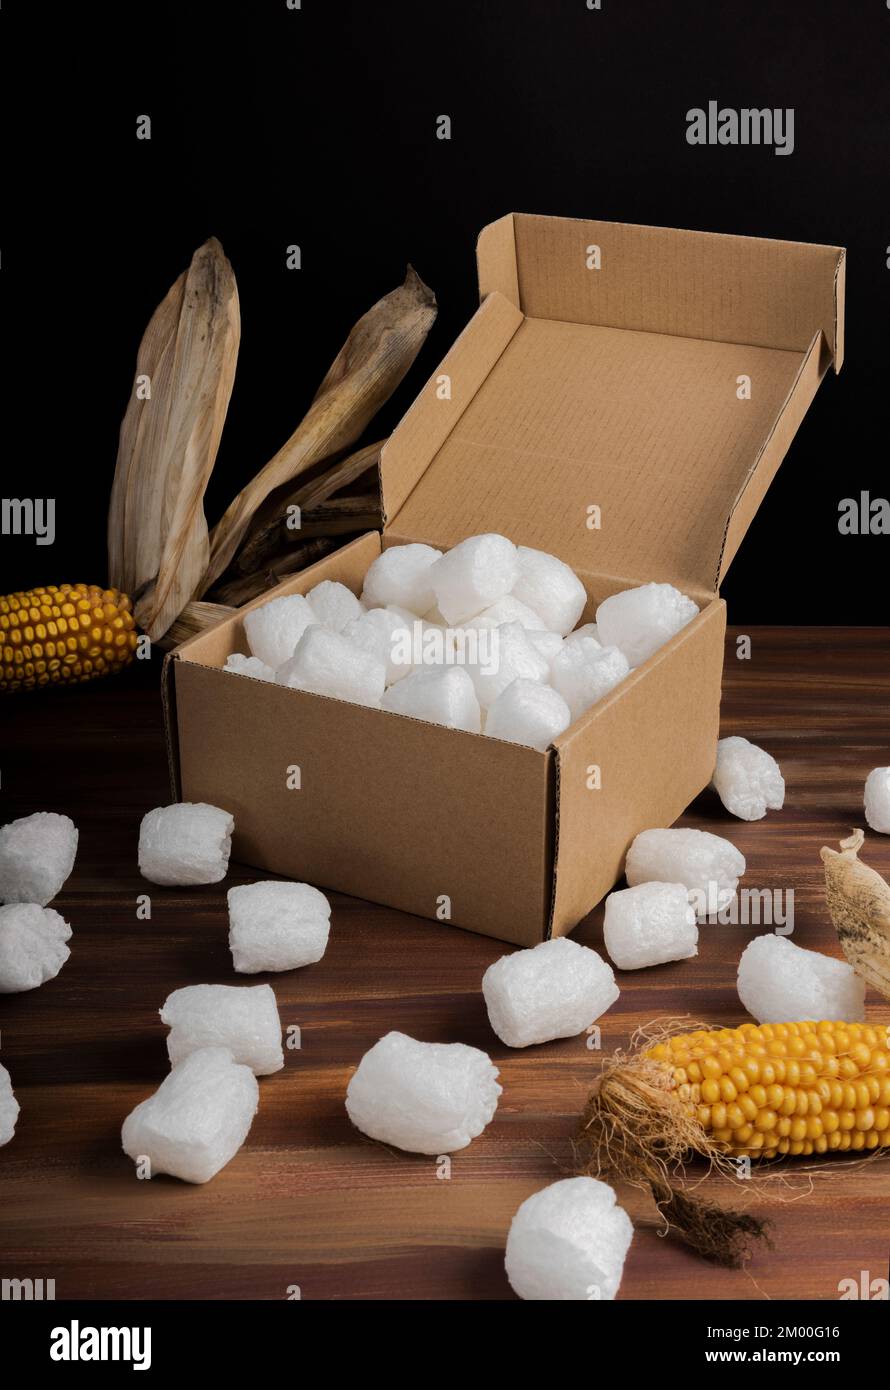 ecological biodegradable corn packaging and cardboad box for ecommerce Stock Photo